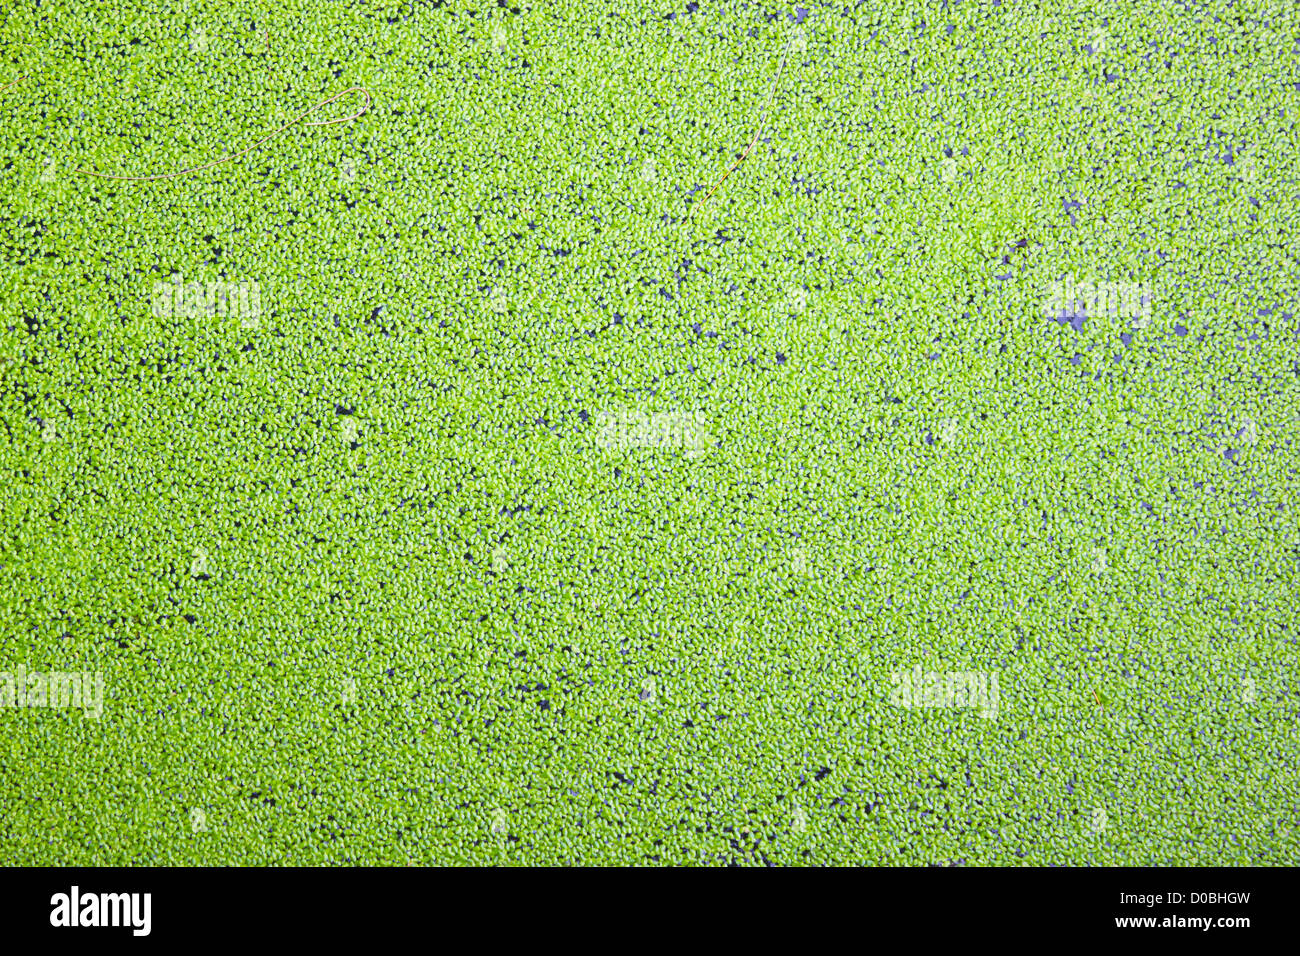 Green duckweed on water as background. Stock Photo